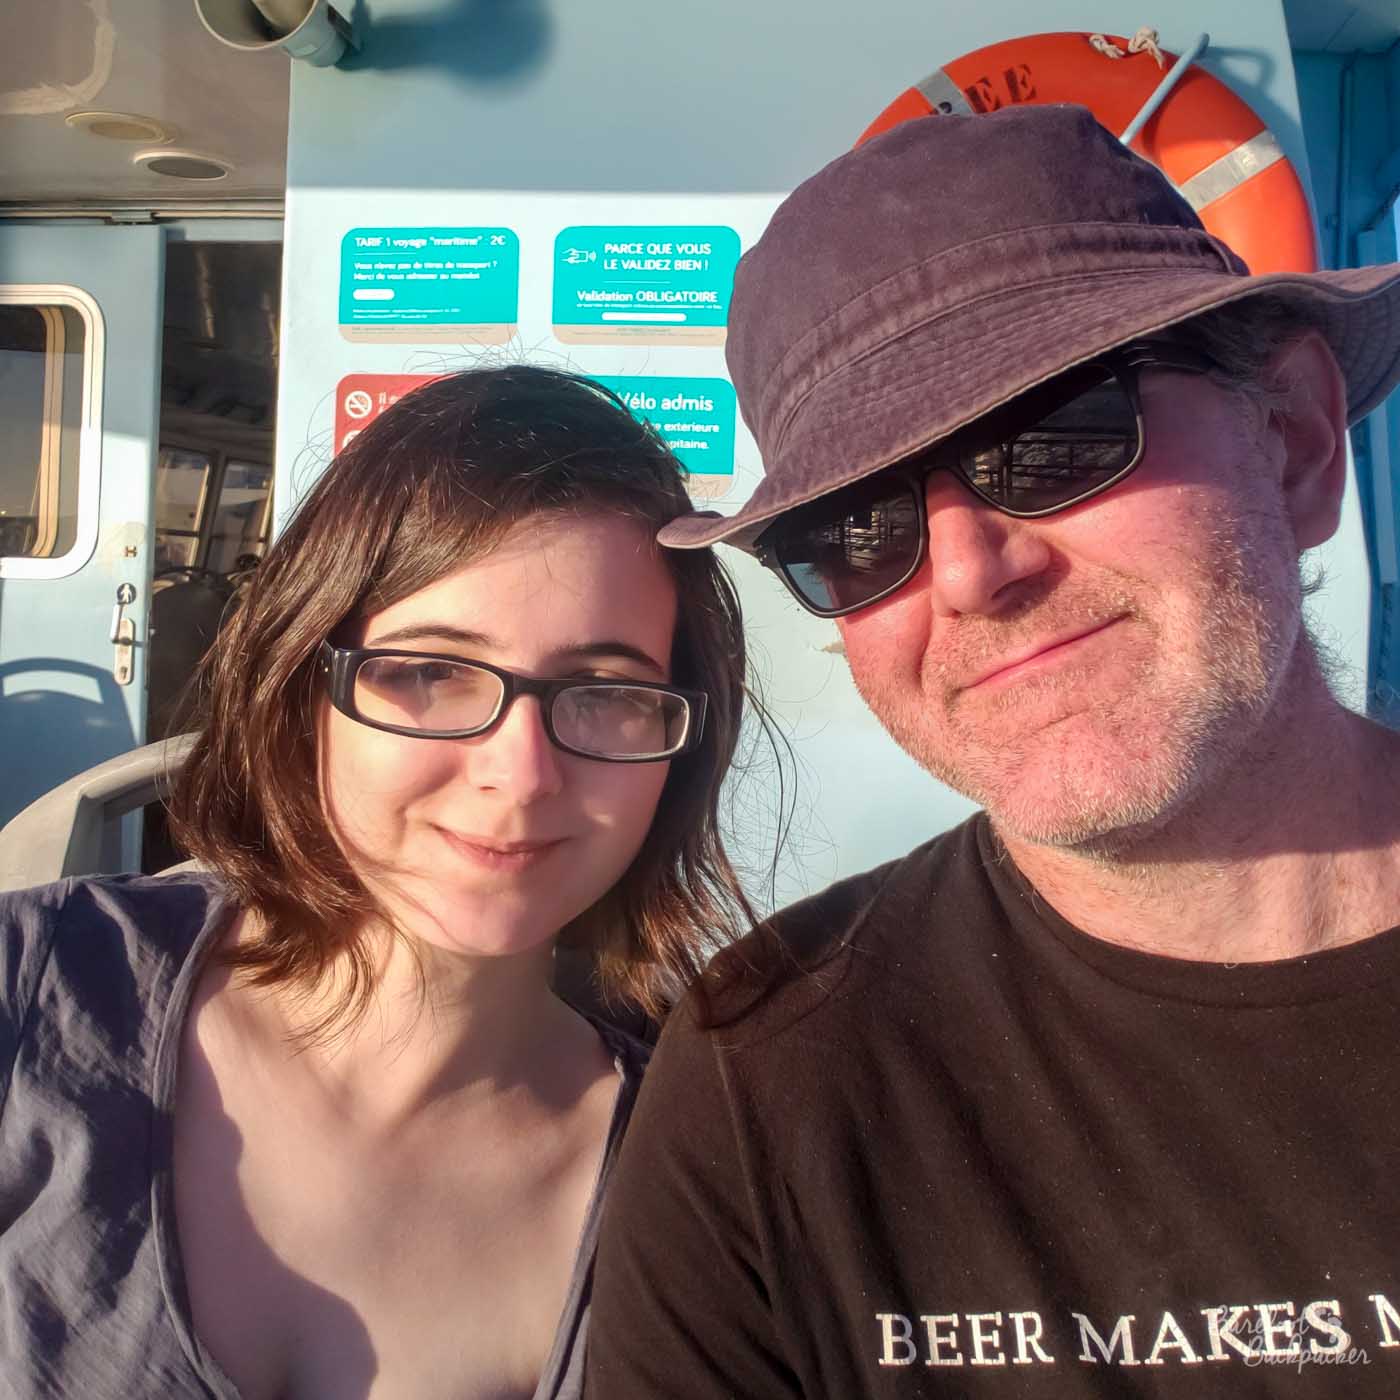 two non-binary people on the deck of a small ferry. They are both wearing glasses. One is female-presenting with shoulder-length hair, and is smiling. The other is male-presenting, wearing a hat and has a bit of facial stubble.